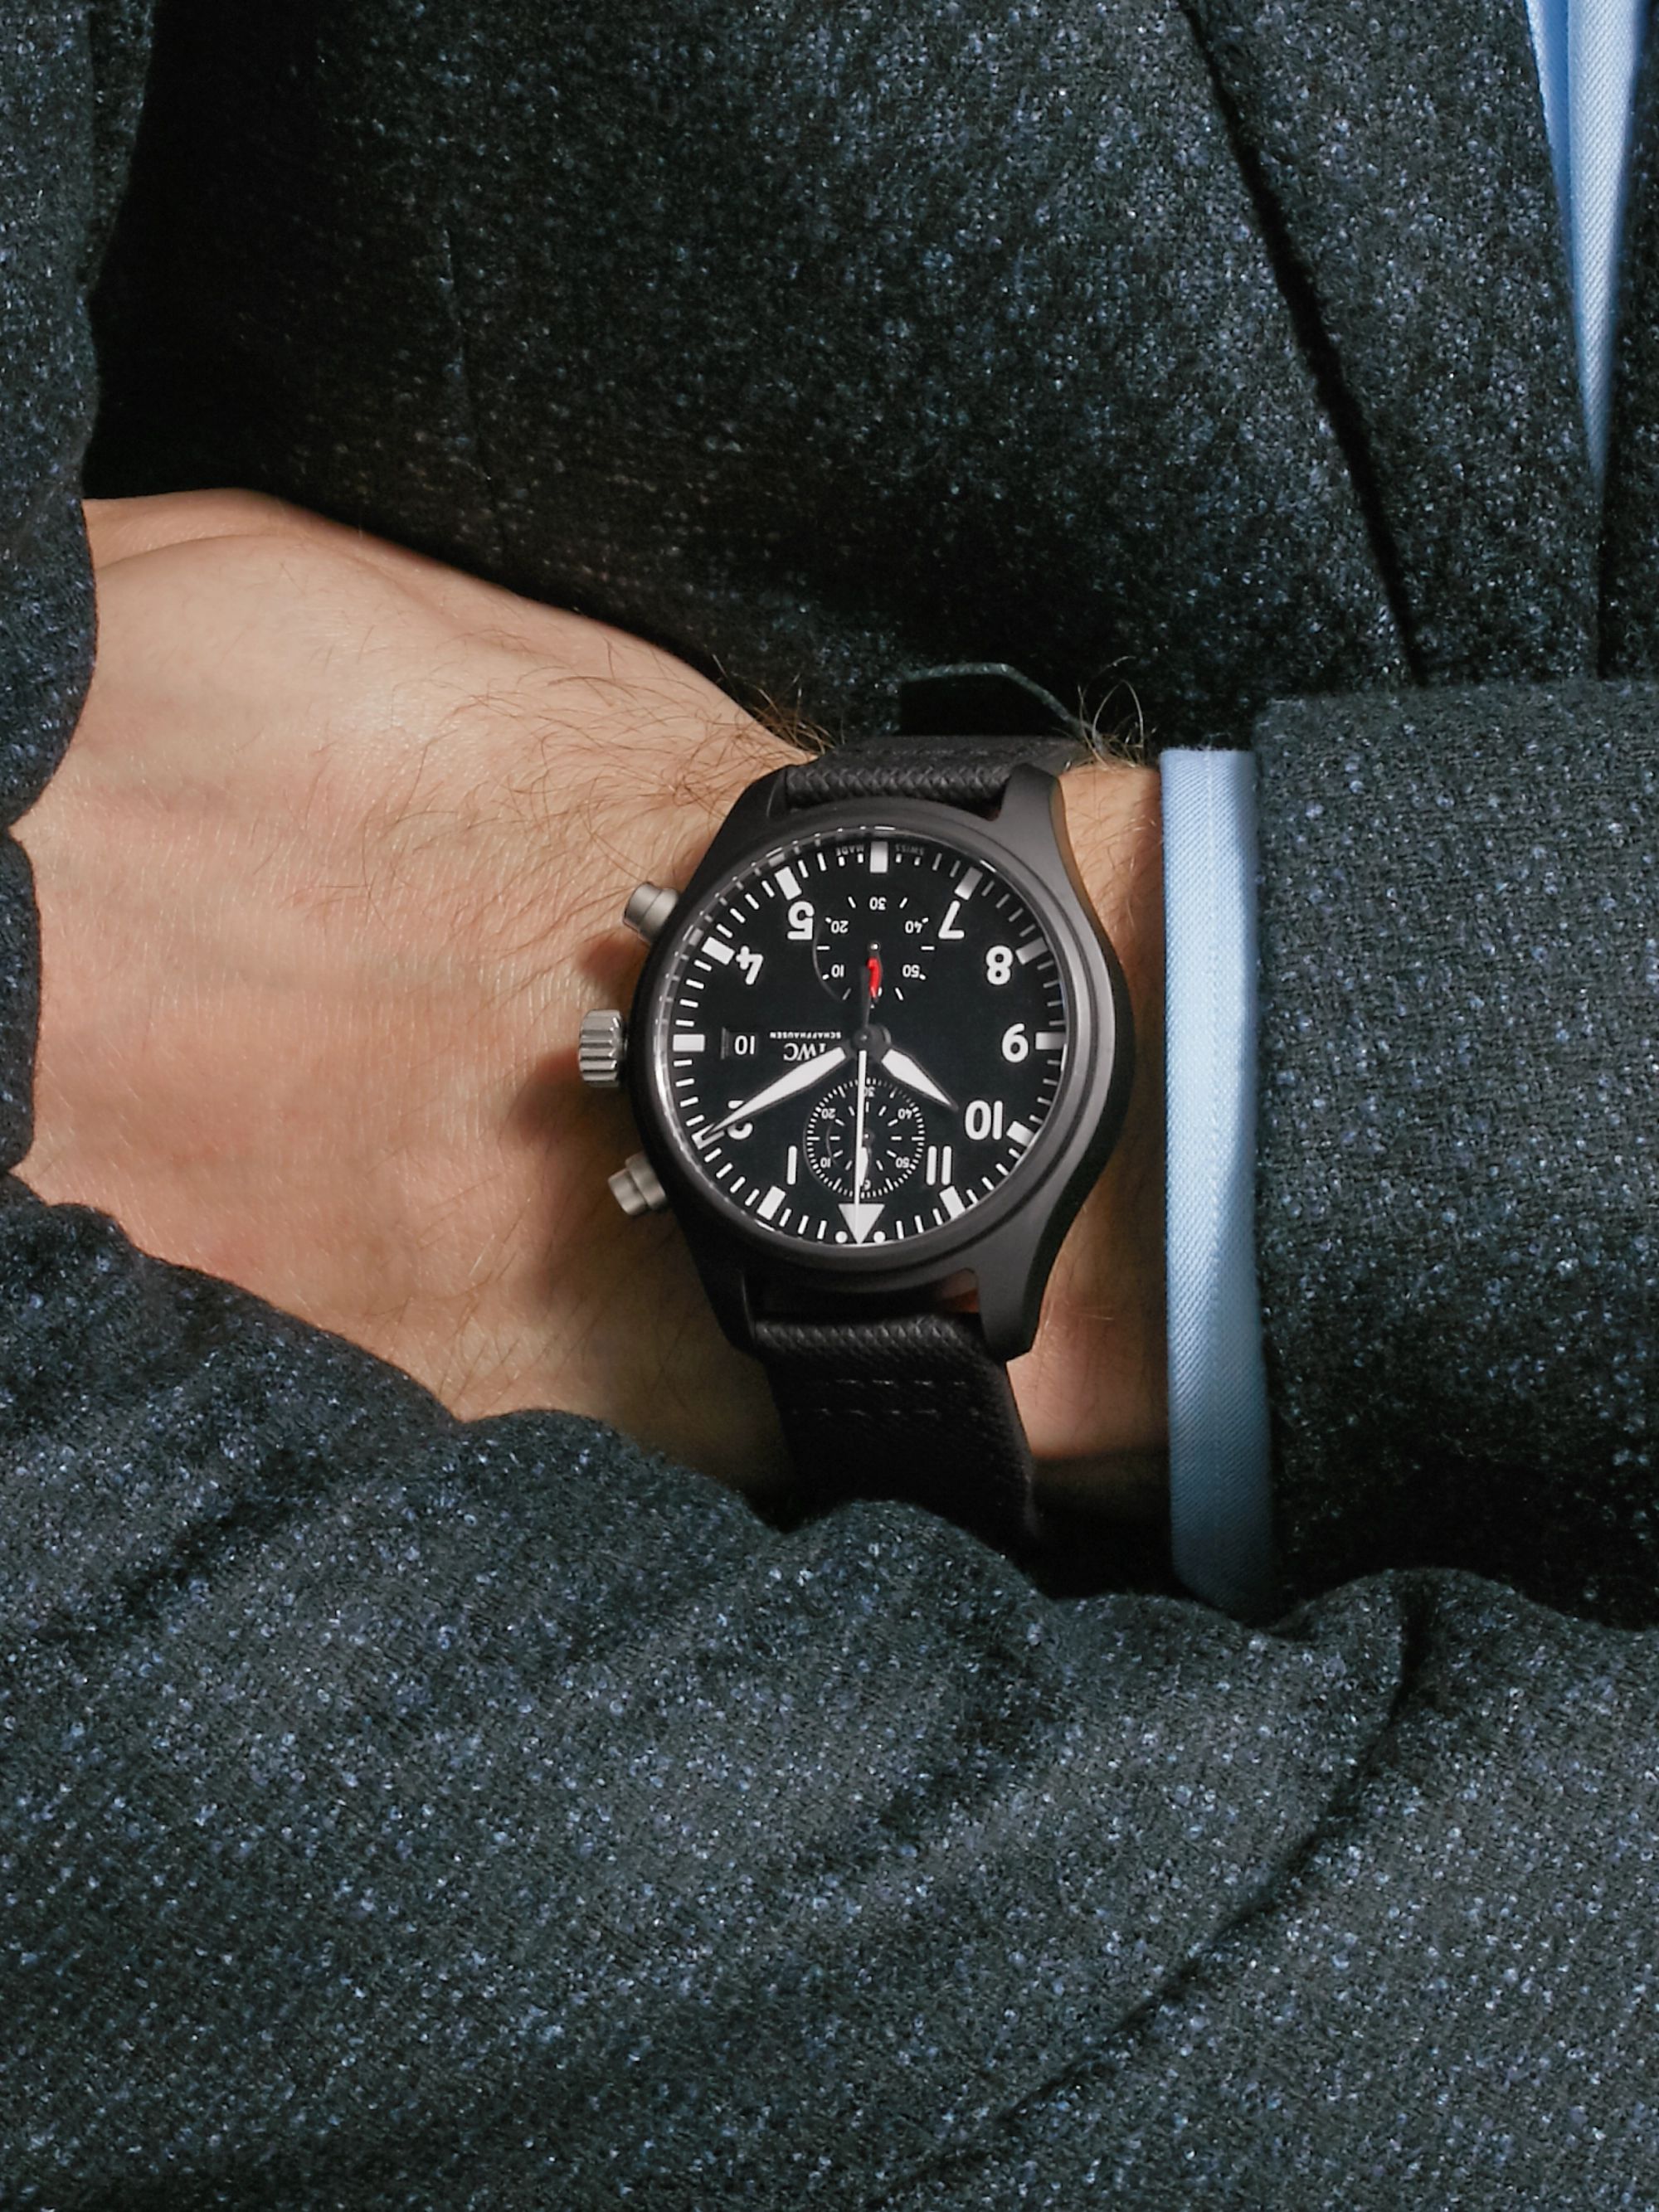 IWC SCHAFFHAUSEN Pilot's TOP GUN Automatic Chronograph 44mm Ceramic and Leather Watch, Ref. No. IW389001